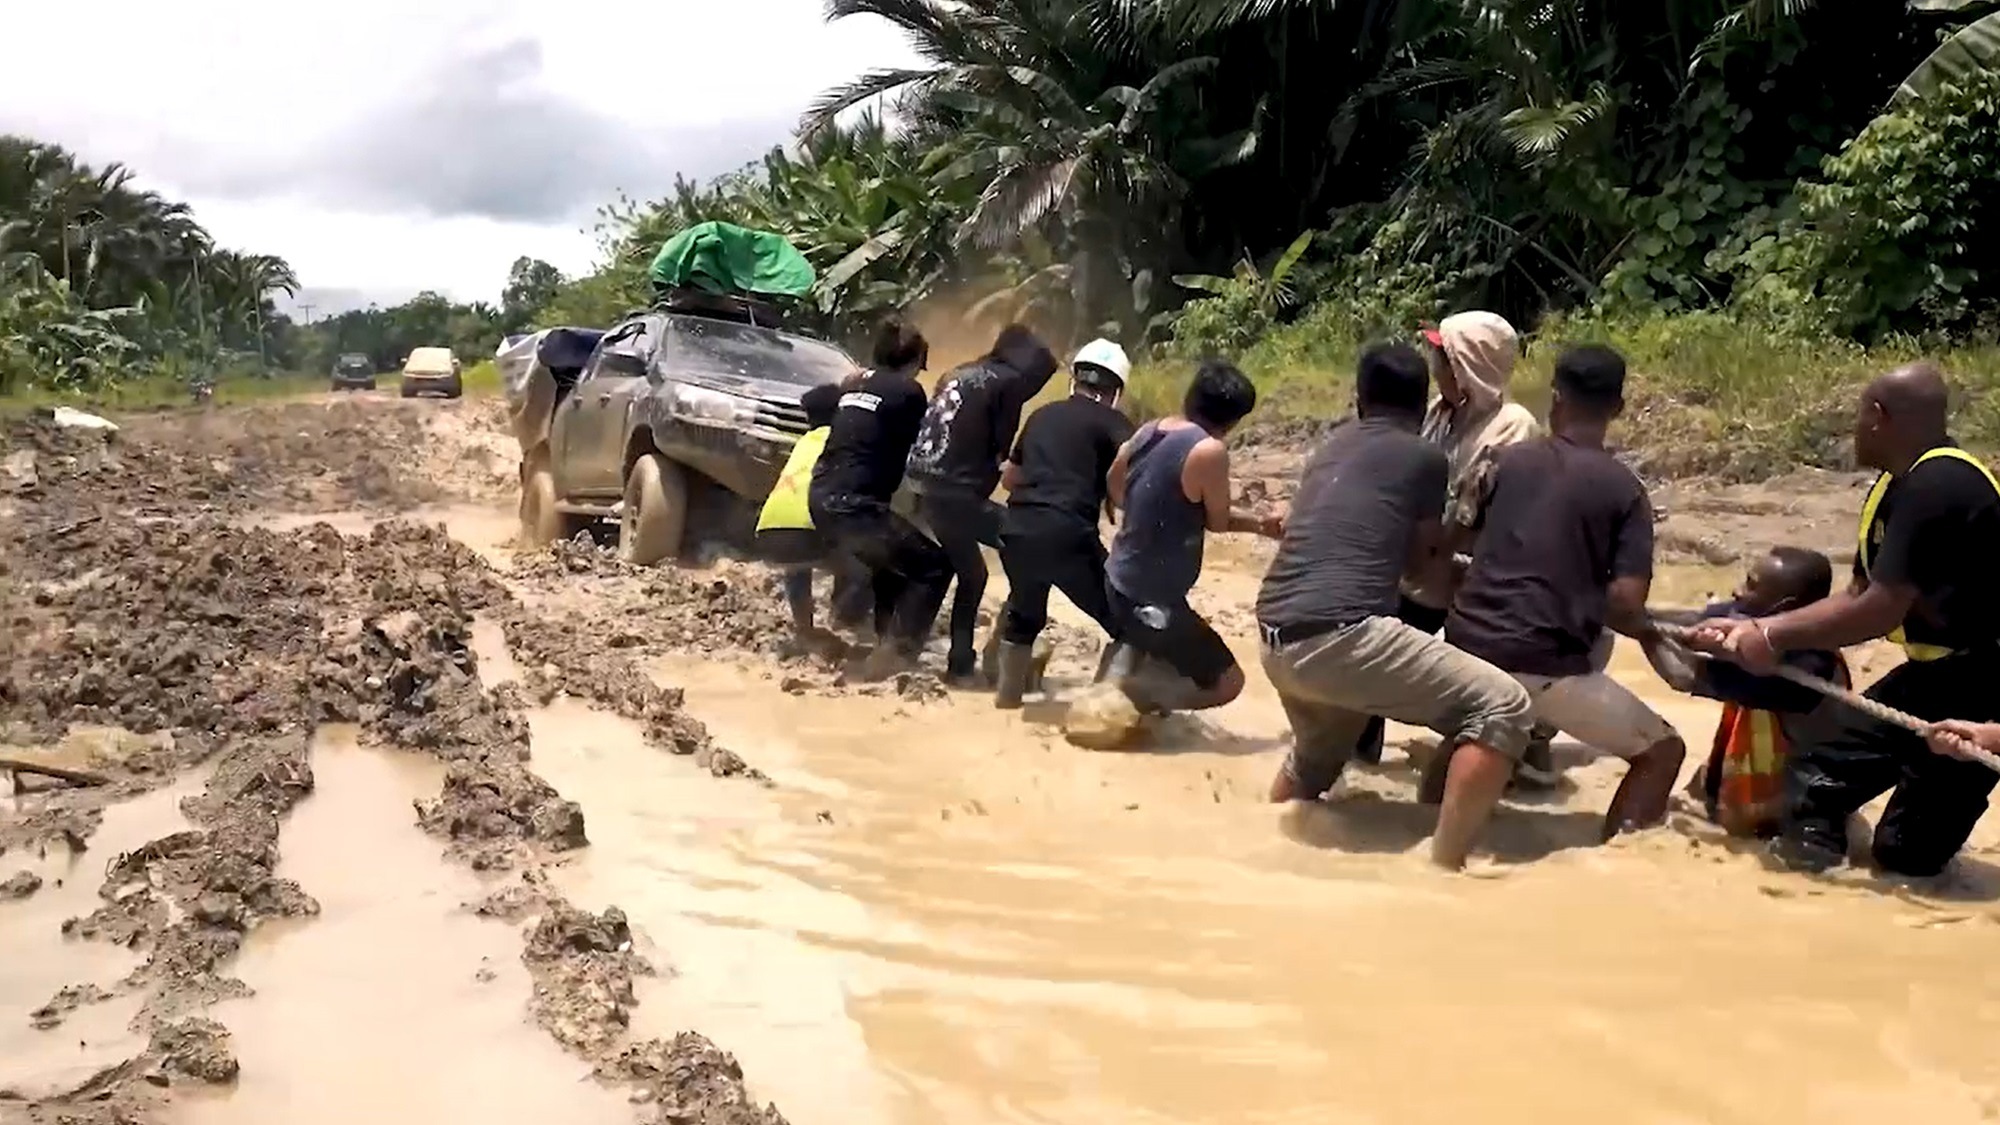 Pulling huawei truck out of mud